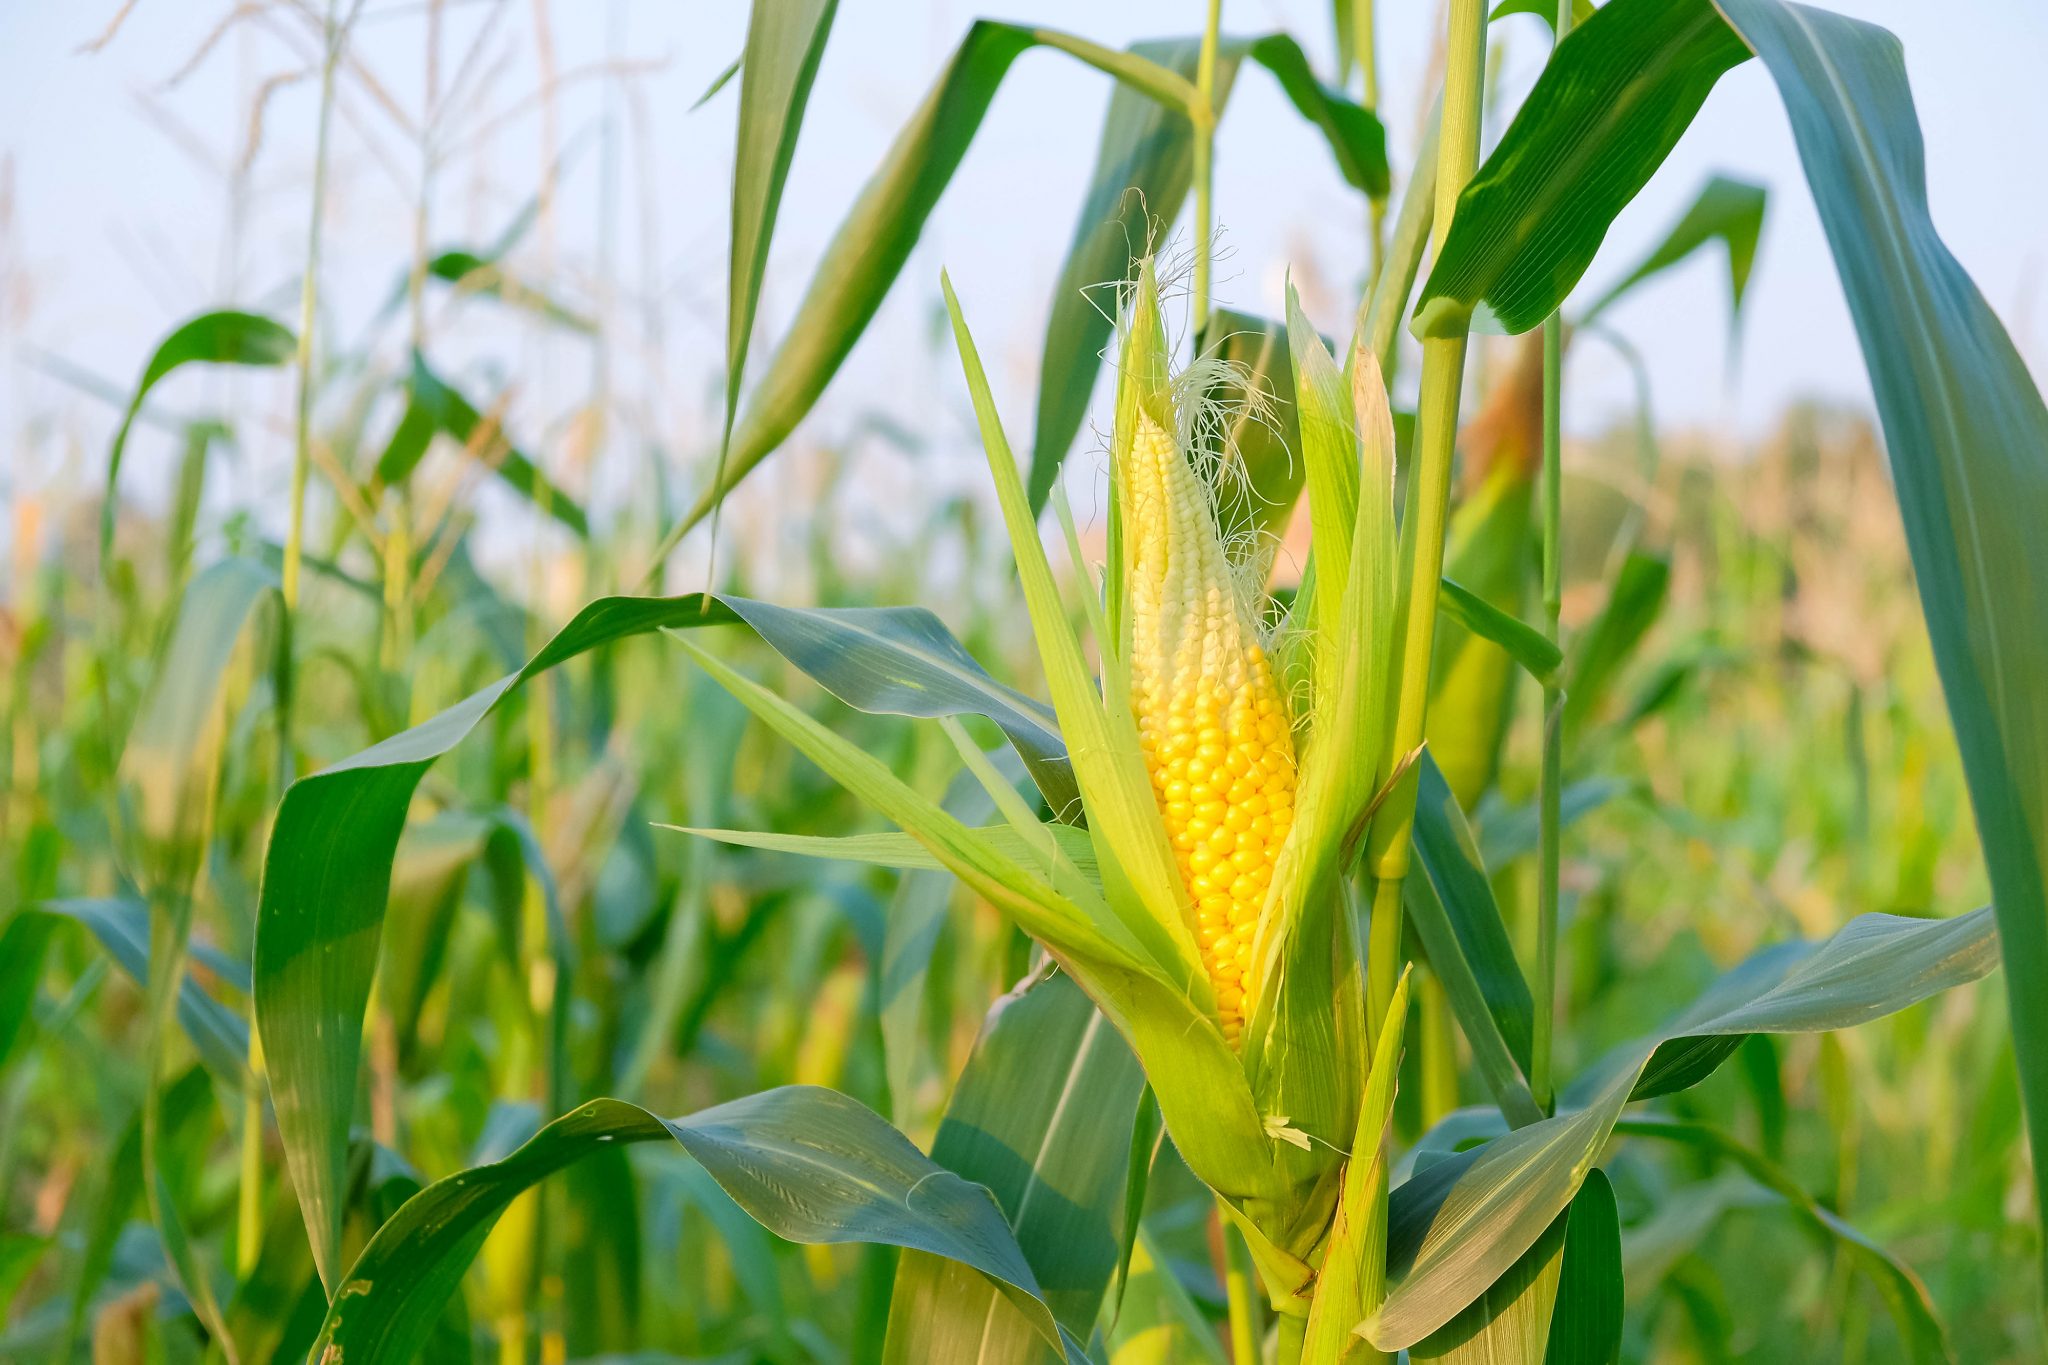 Field Corn Vs Sweet Corn: What's The Difference?